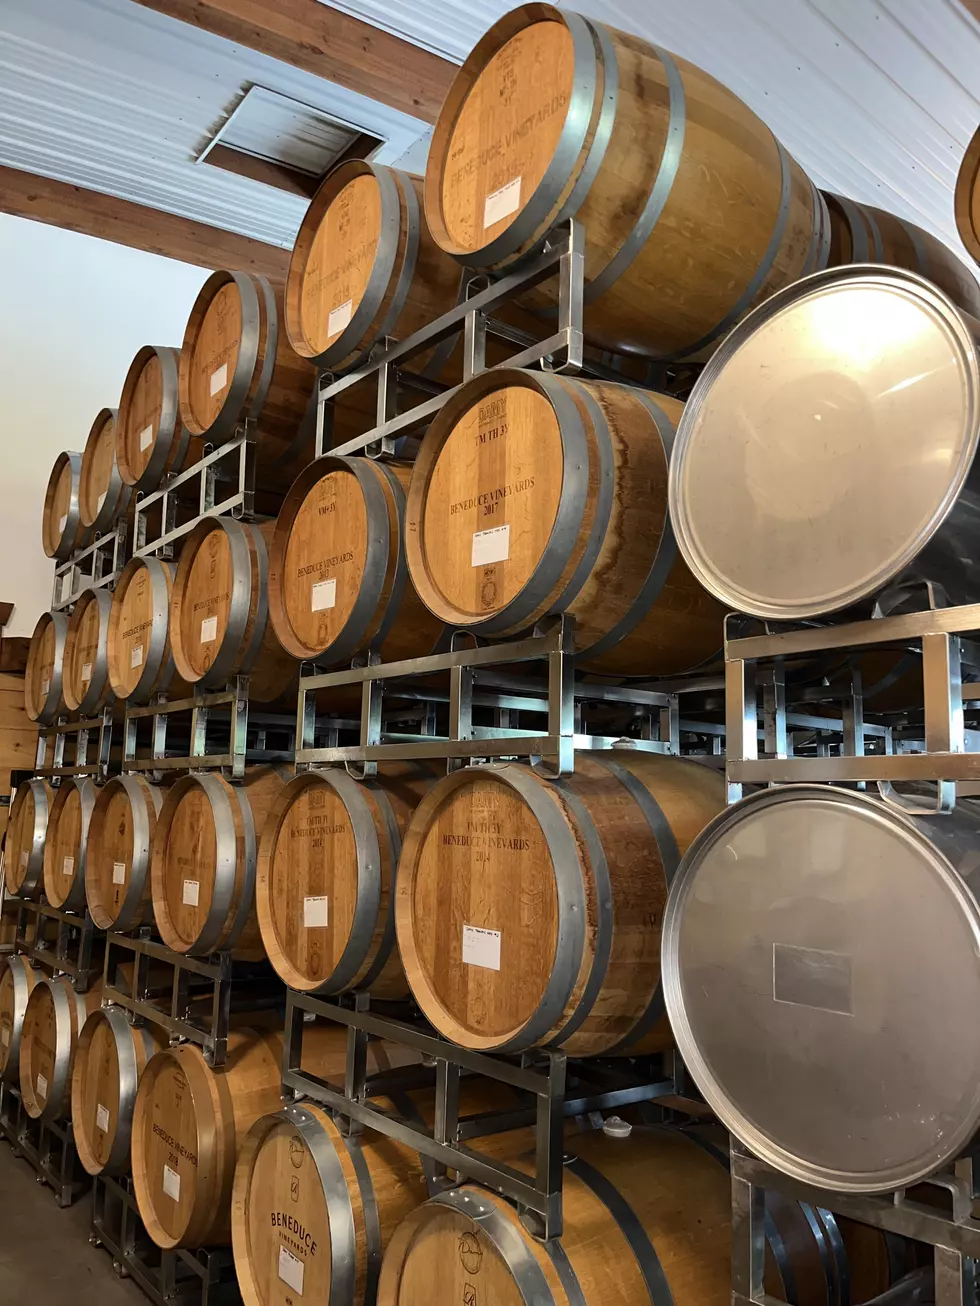 This New Jersey Winery Is Well Worth The Summer 2022 Trip